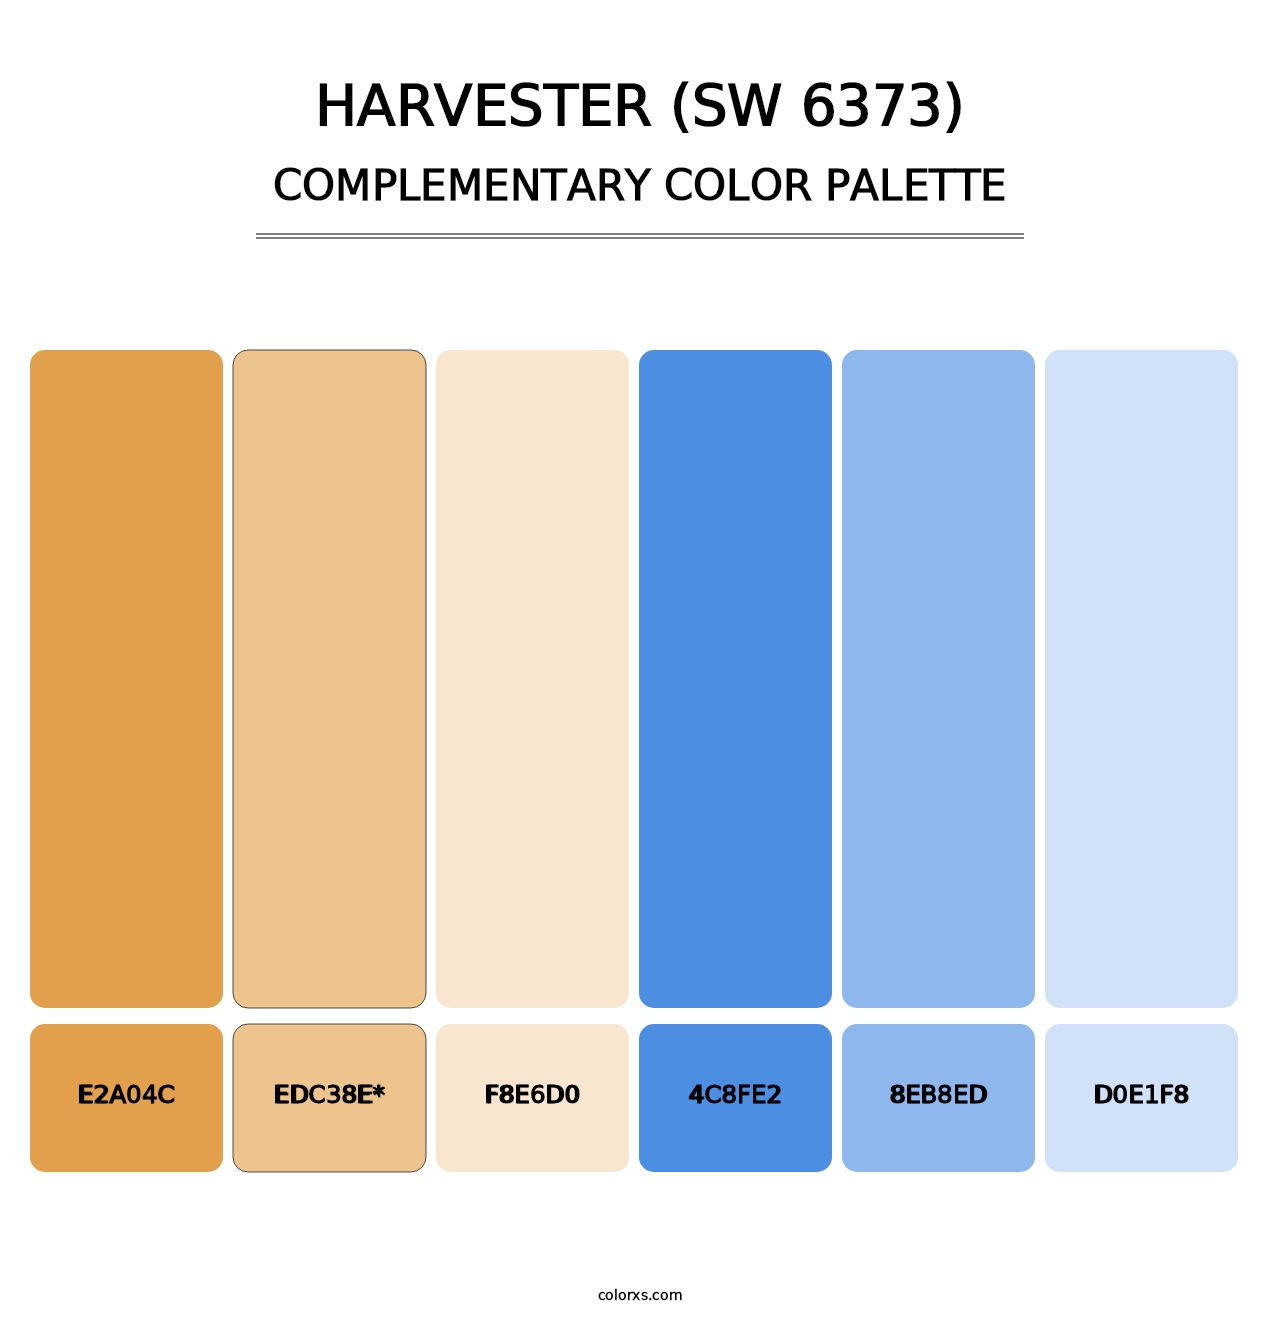 Harvester (SW 6373) - Complementary Color Palette